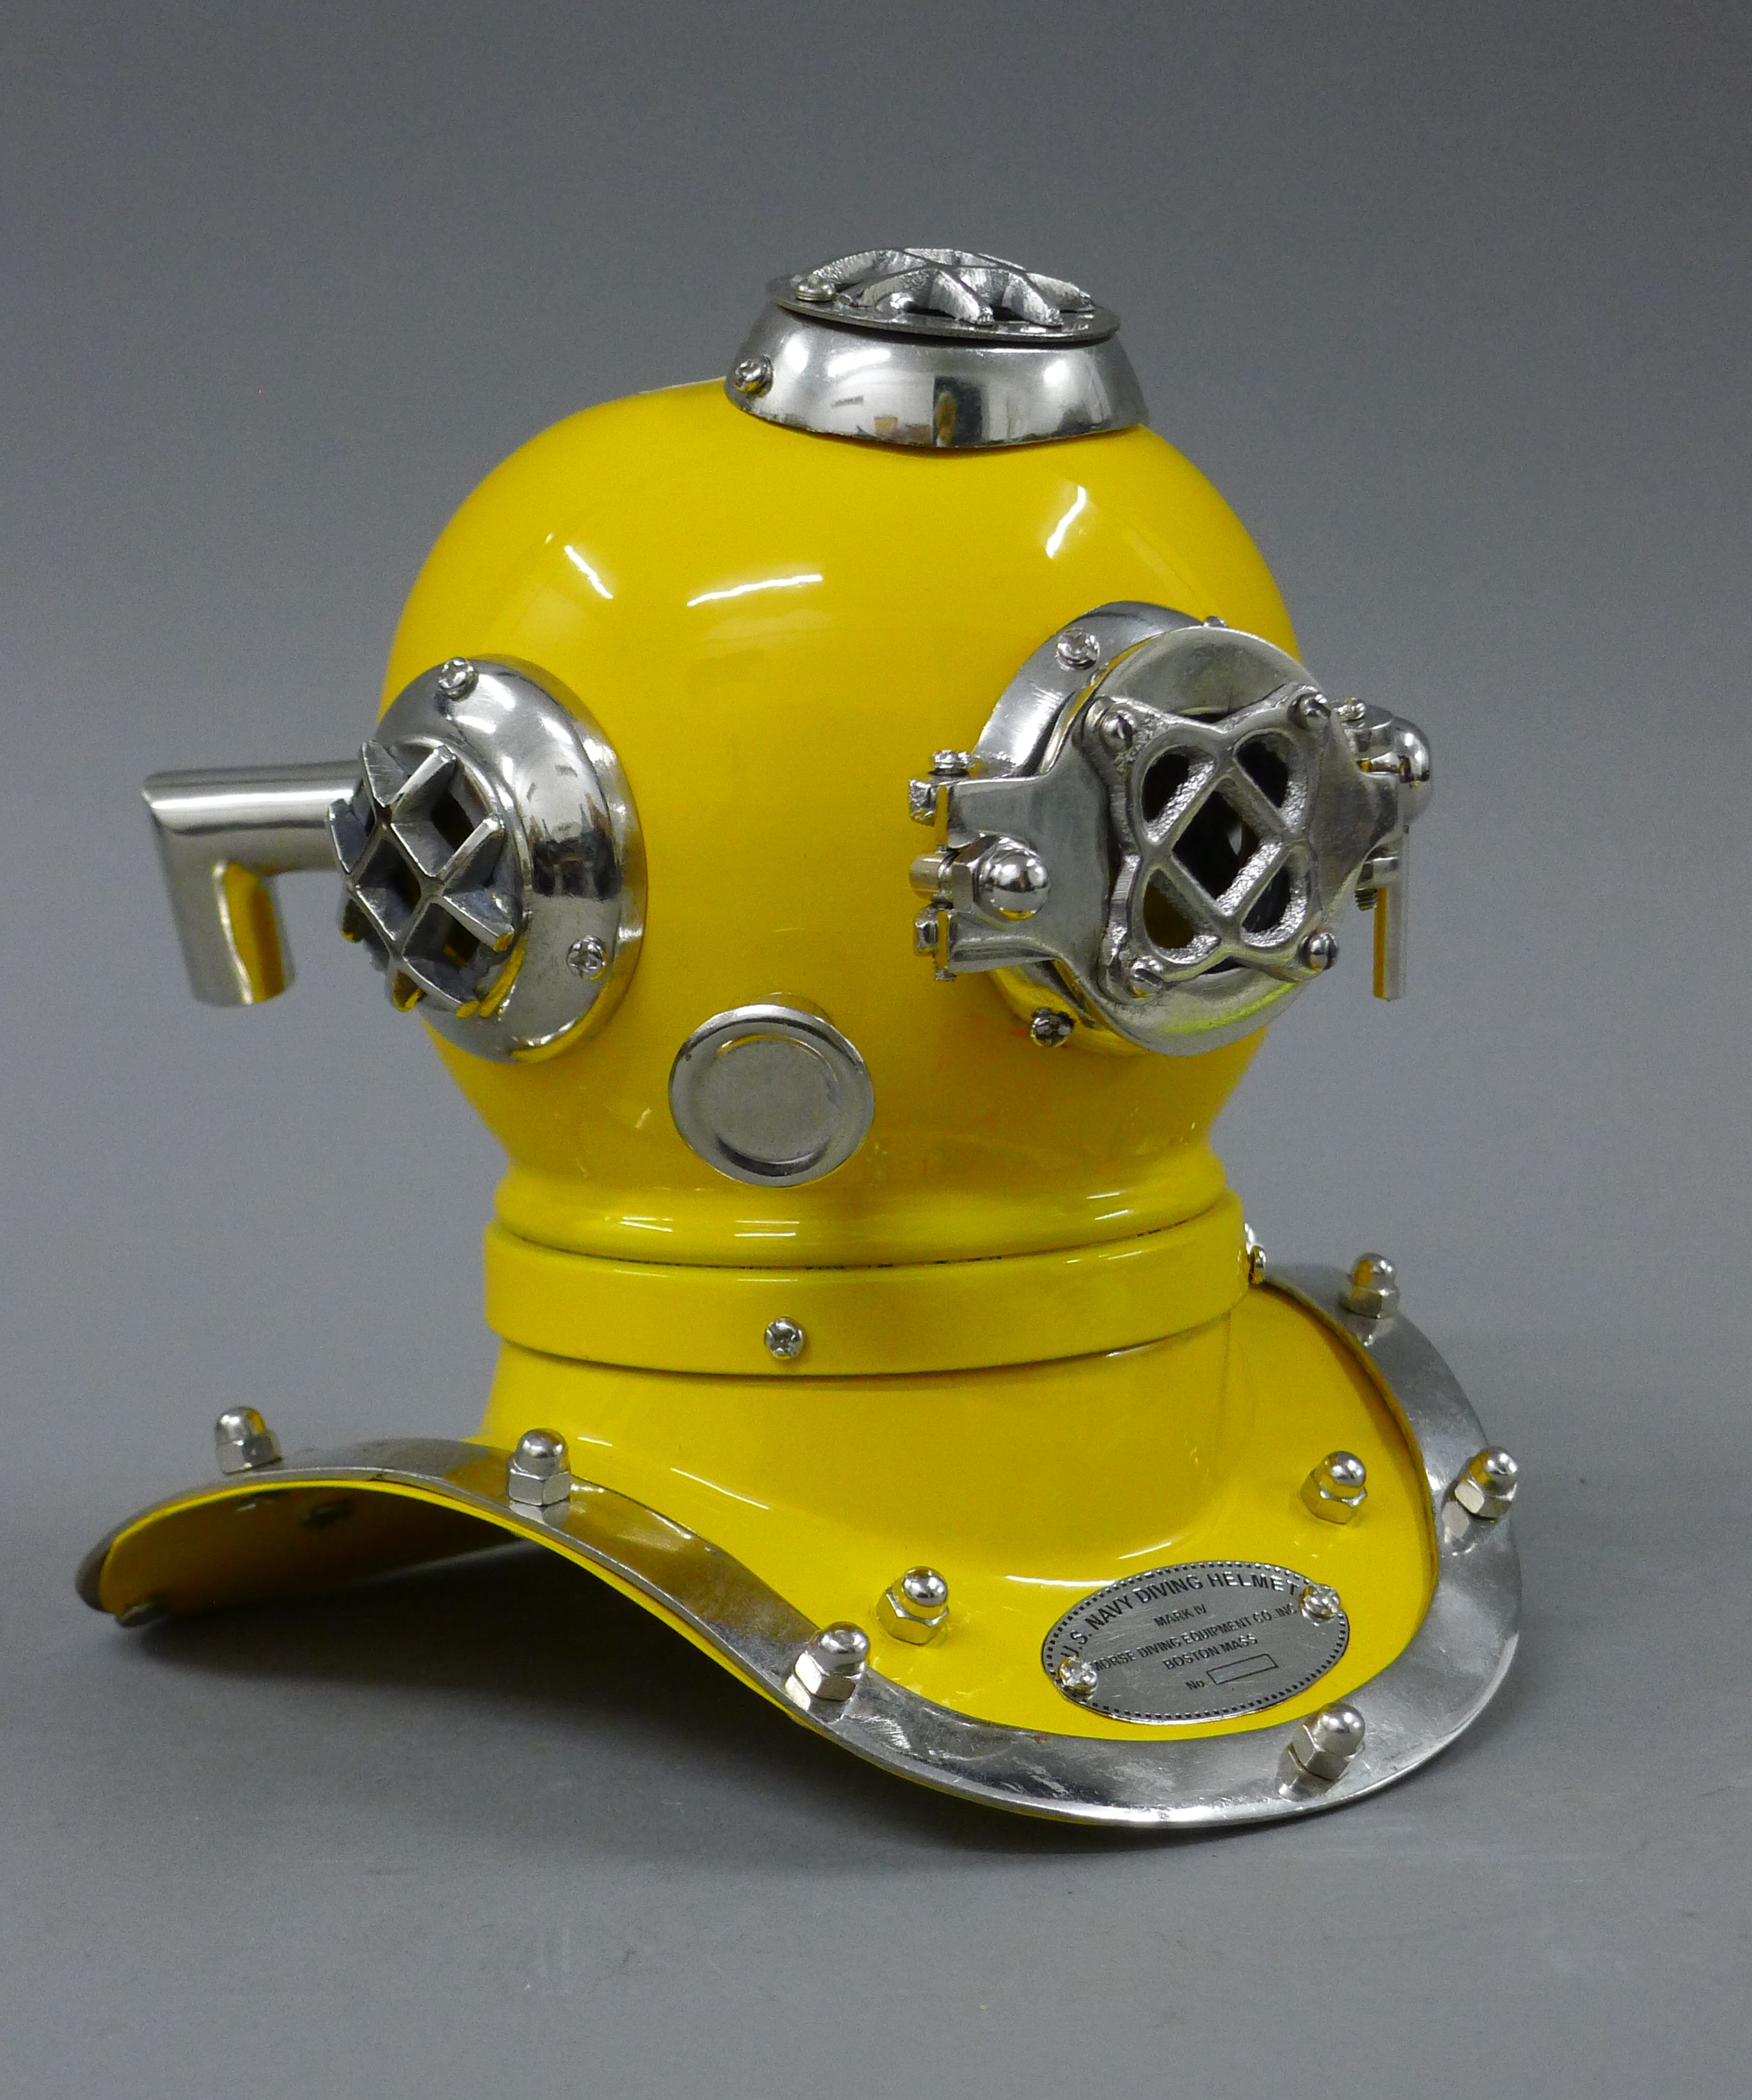 A small model of a diver's helmet. 17 cm high. - Image 2 of 3